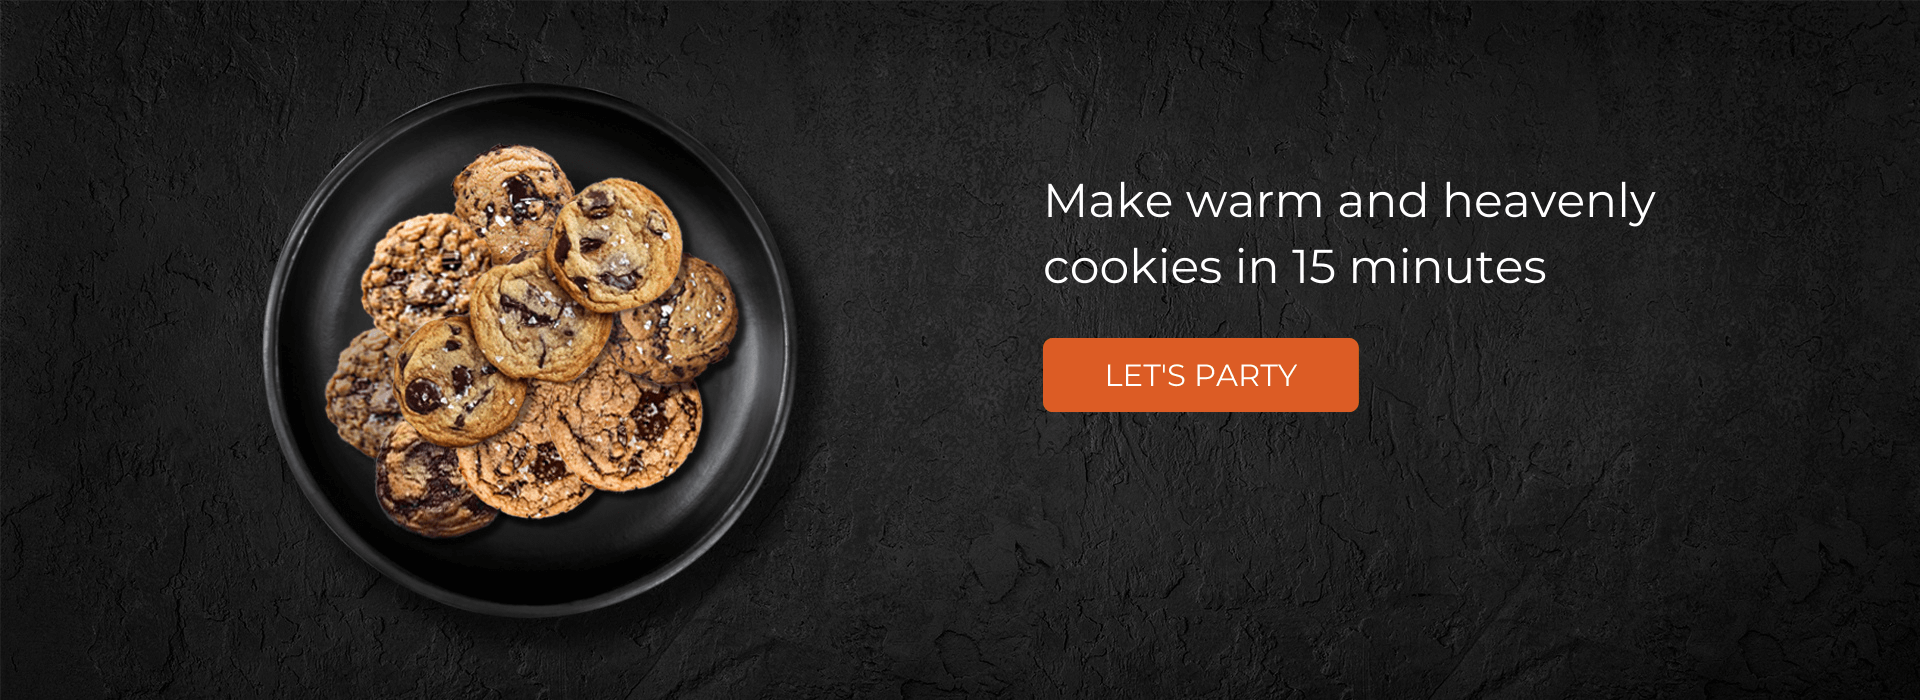 Make warm and heavenly cookies in 15 minutes